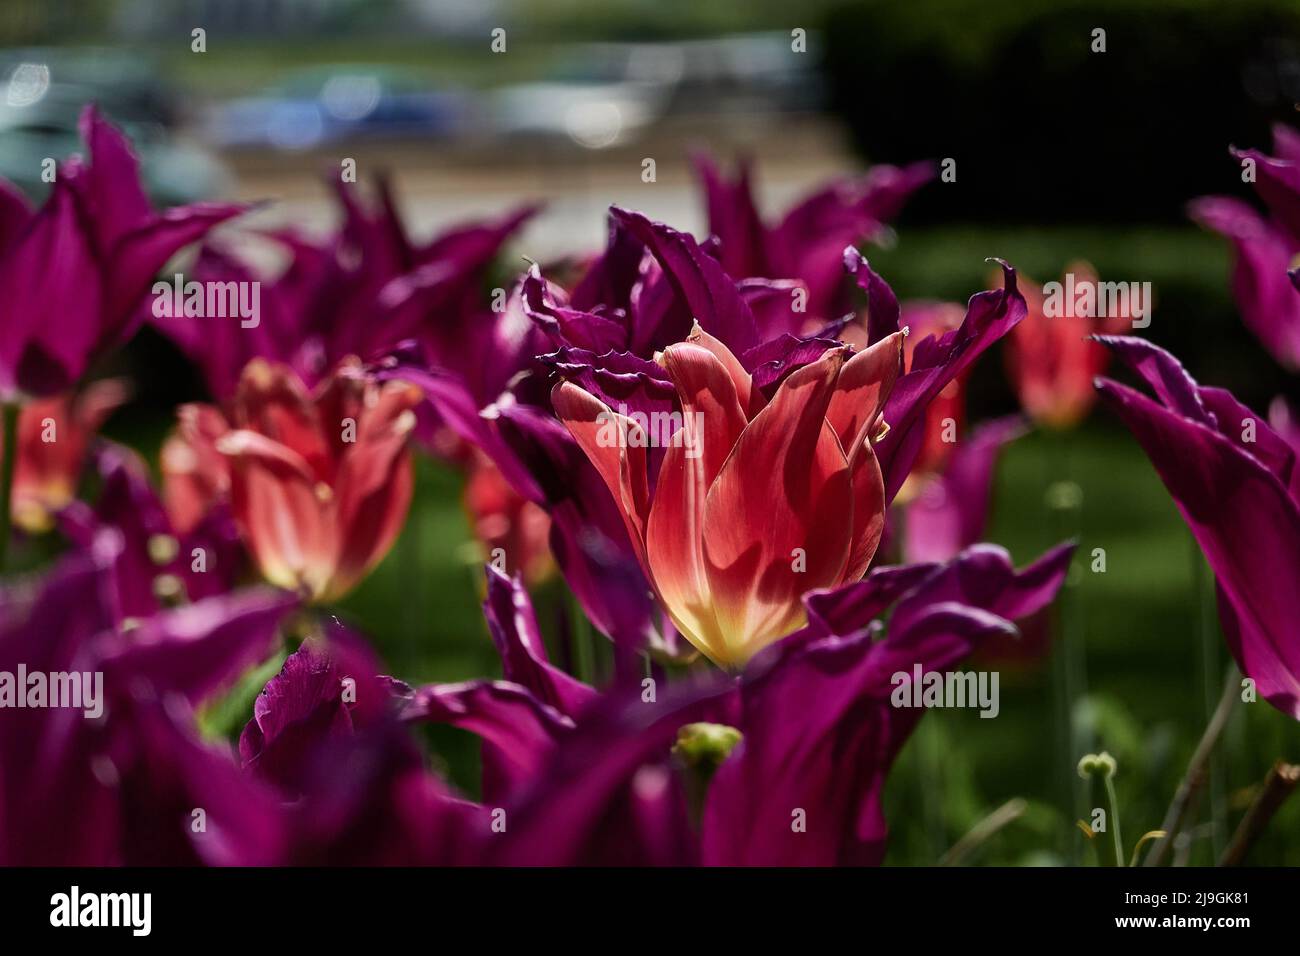 close-up of purple and coral colored tulips blooms with road in background Stock Photo